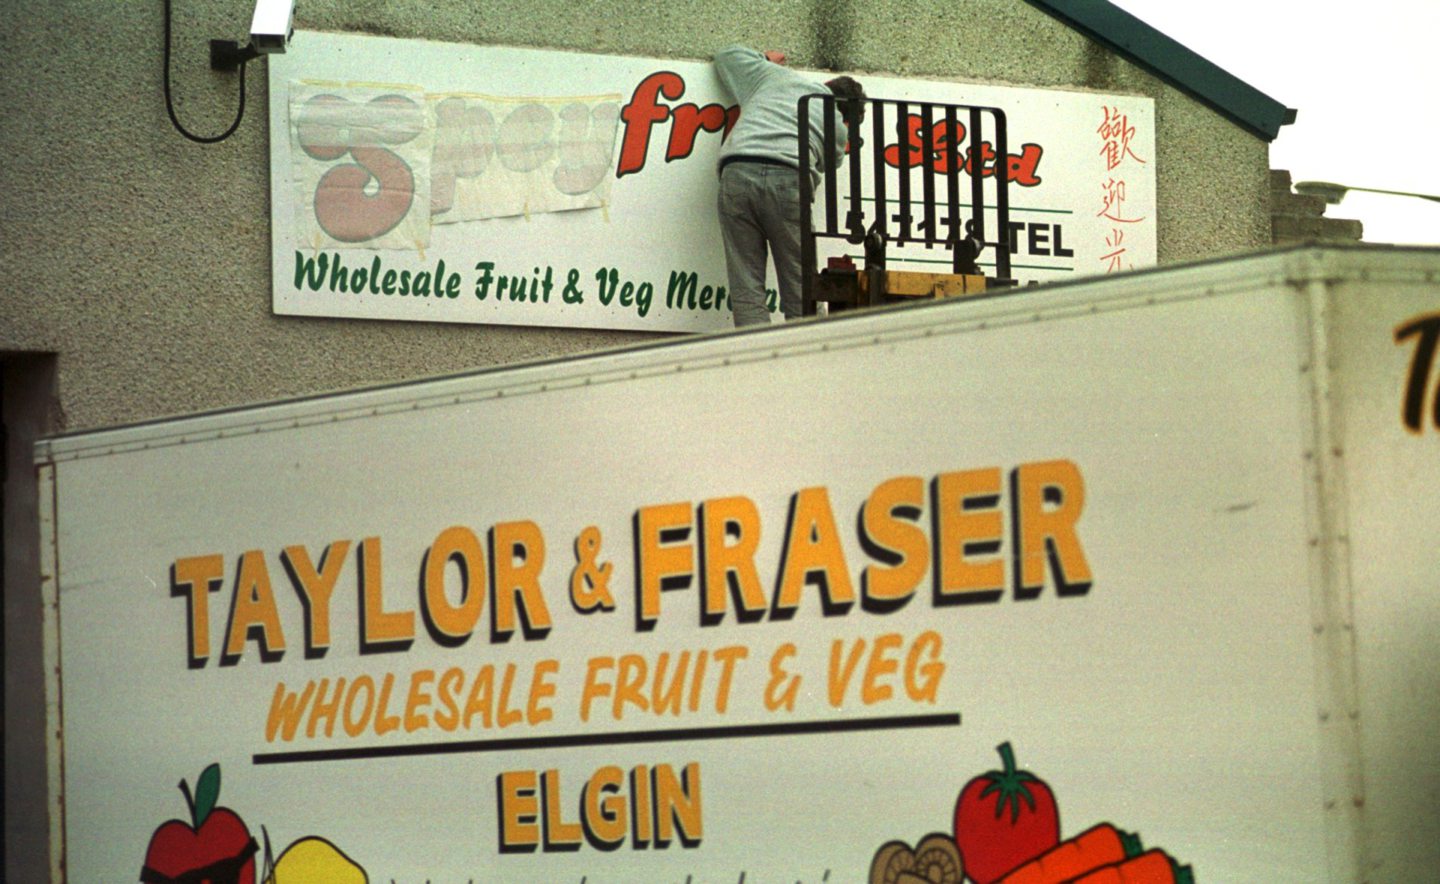 A van from Nat Fraser's fruit and veg company. Image: DC Thomson.